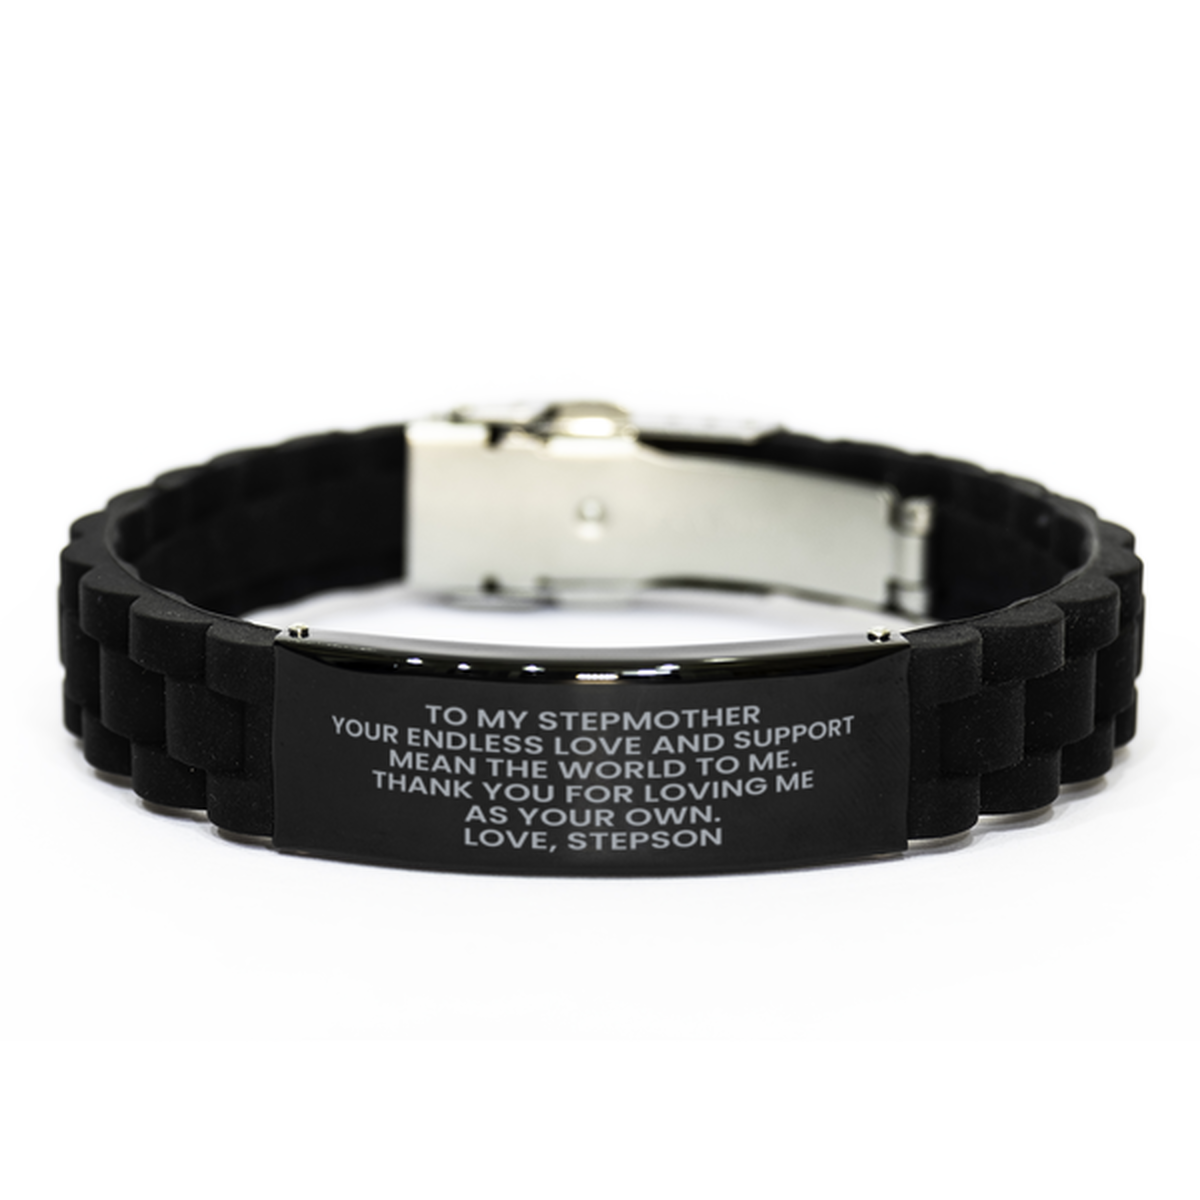 To My Stepmother   Black Bracelet, Your Endless Love, Valentines Gifts For Stepmother From Stepson, Birthday Gifts For Women